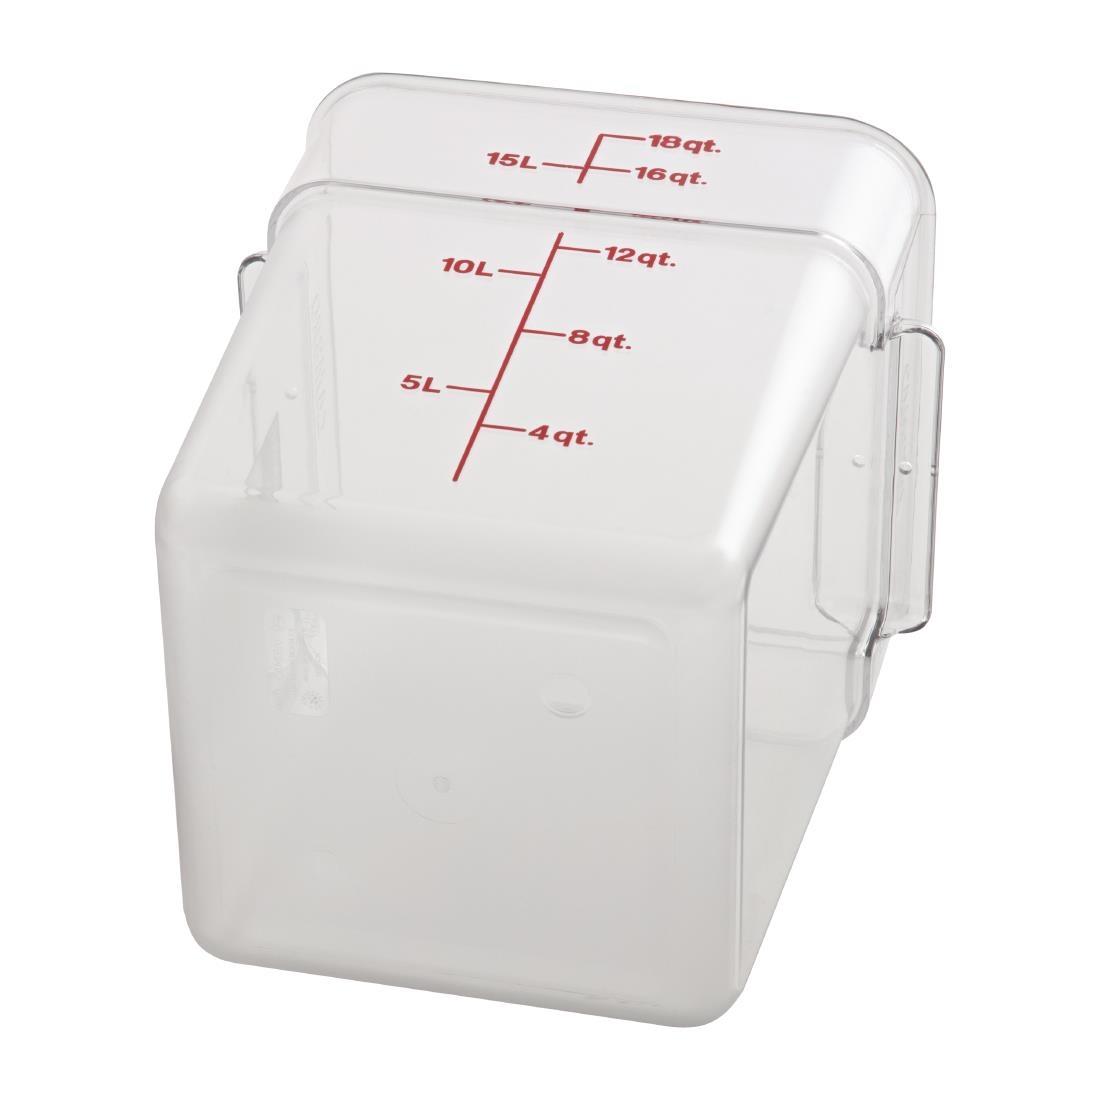 Cambro Square Polycarbonate Food Storage Container 17.2 Ltr - DT198  - 4